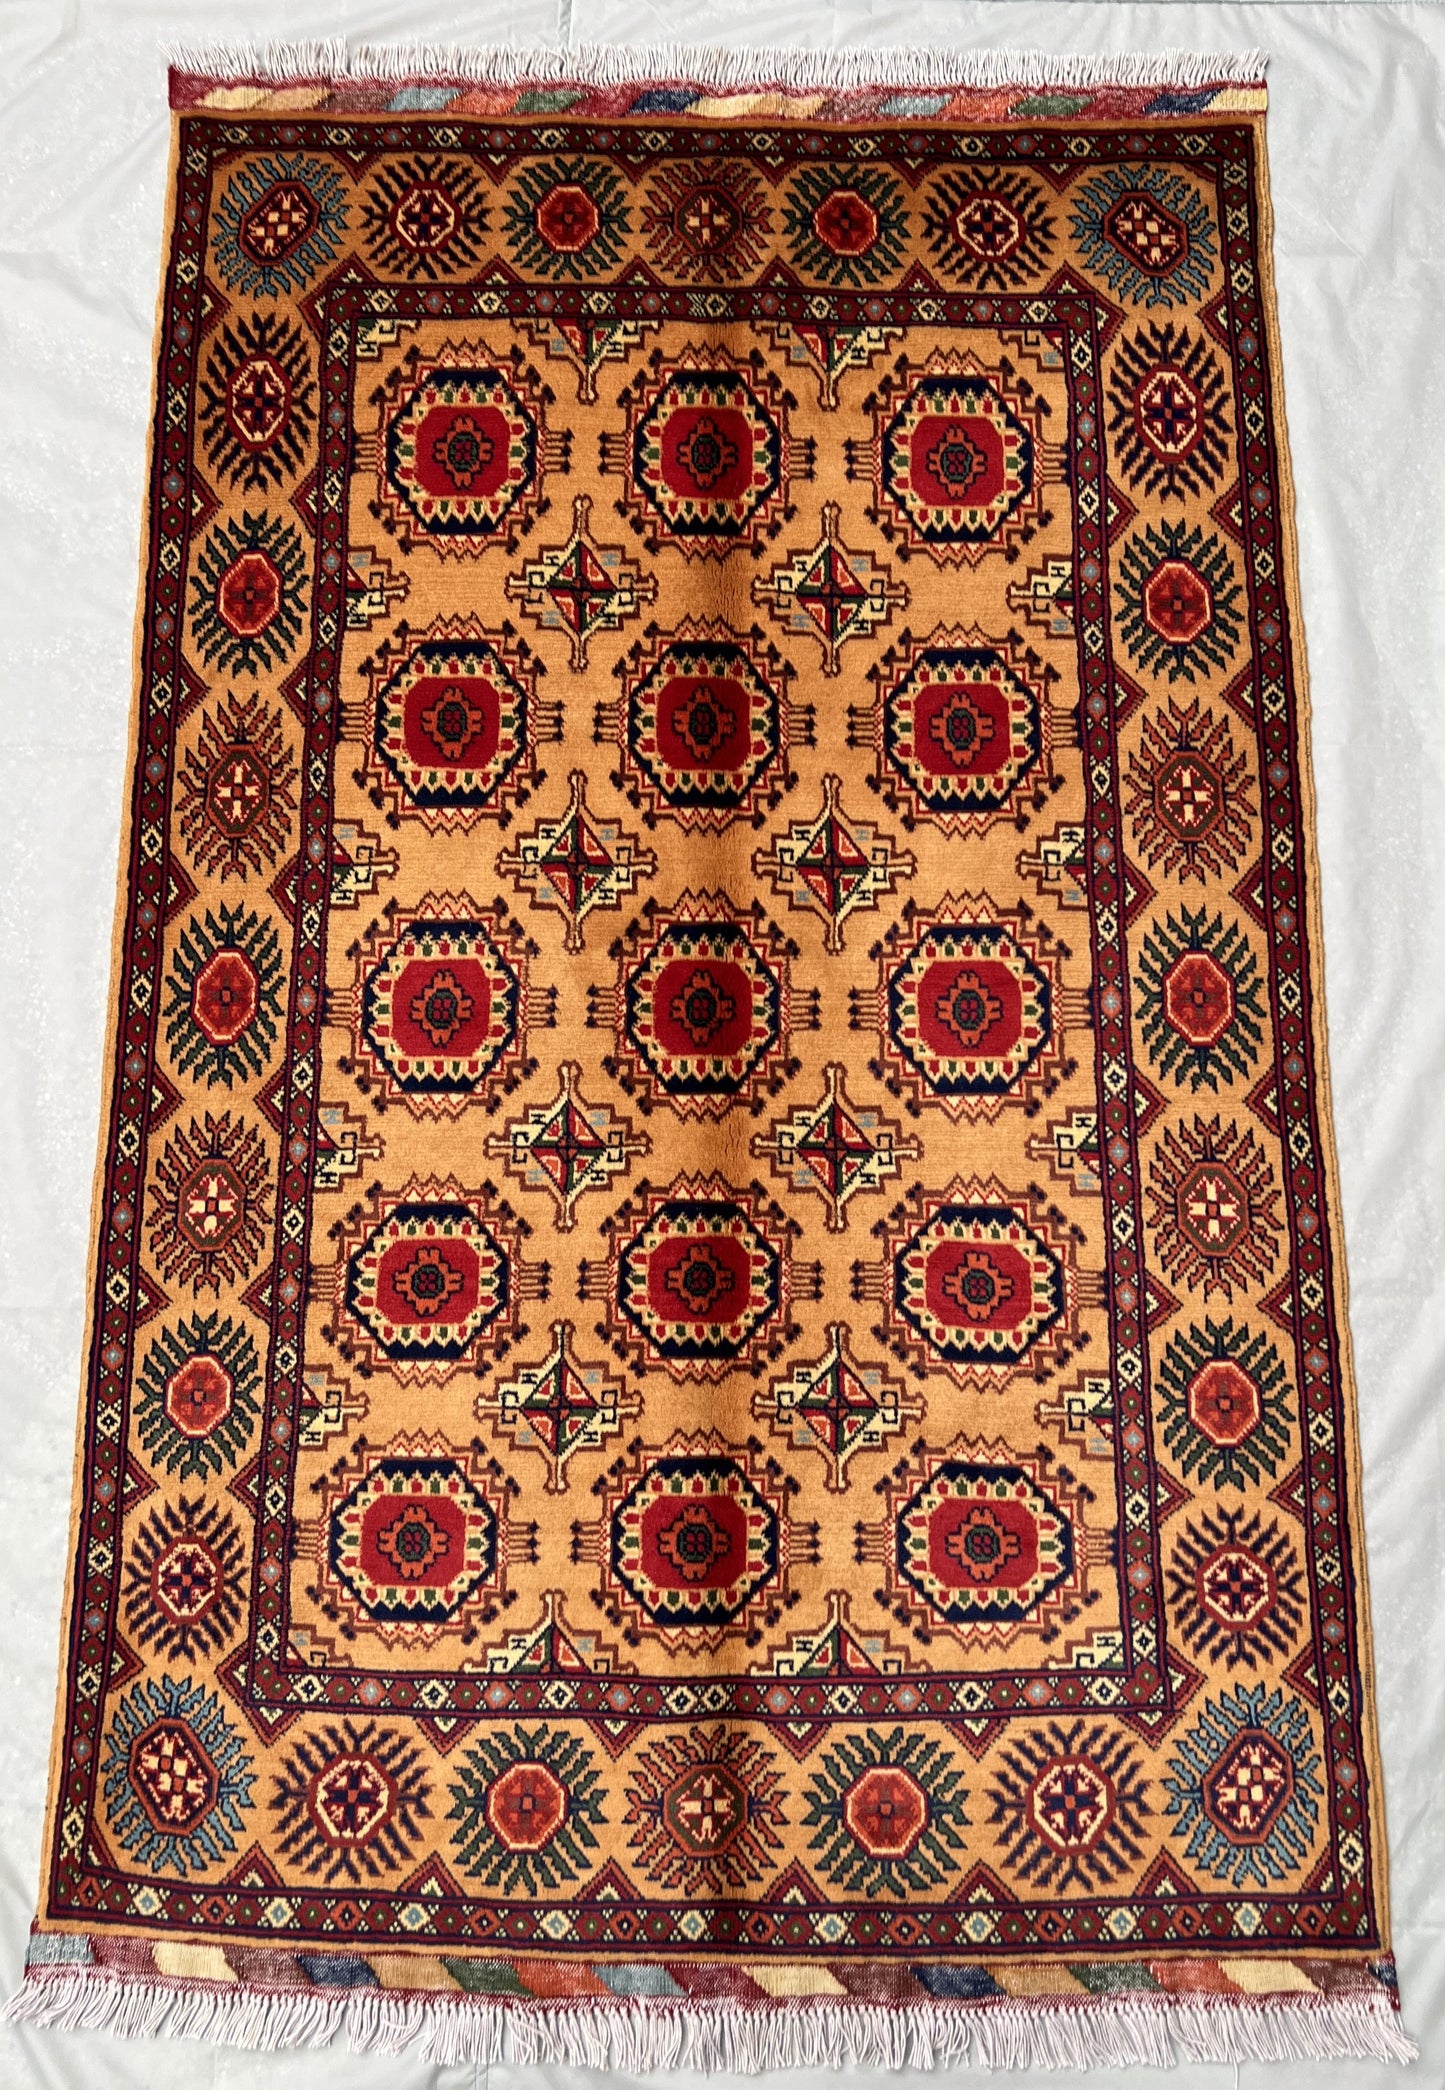 Afghan Hand Knotted/ Knitted Living Room/Dining Room Alabkhmal Area Rug 5.3ftx3.2ft (AL-M-5X3-Y/O-N) (Mazar-e-sharif) - Kabul Rugs